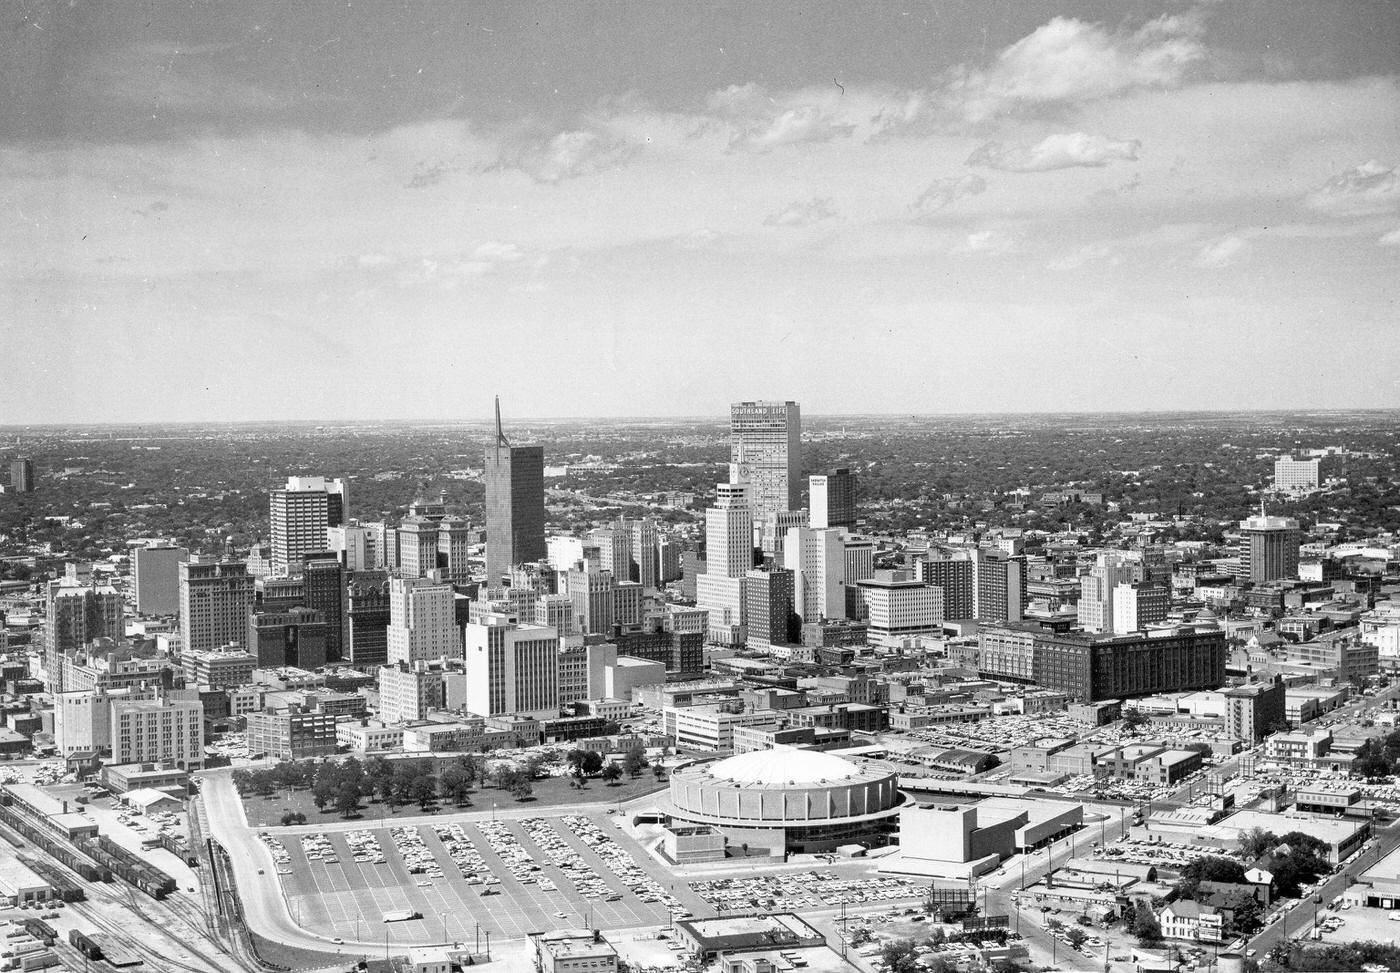 Aerial view with the Memorial Auditorium in the center foreground, Dallas, Texas, 1960.